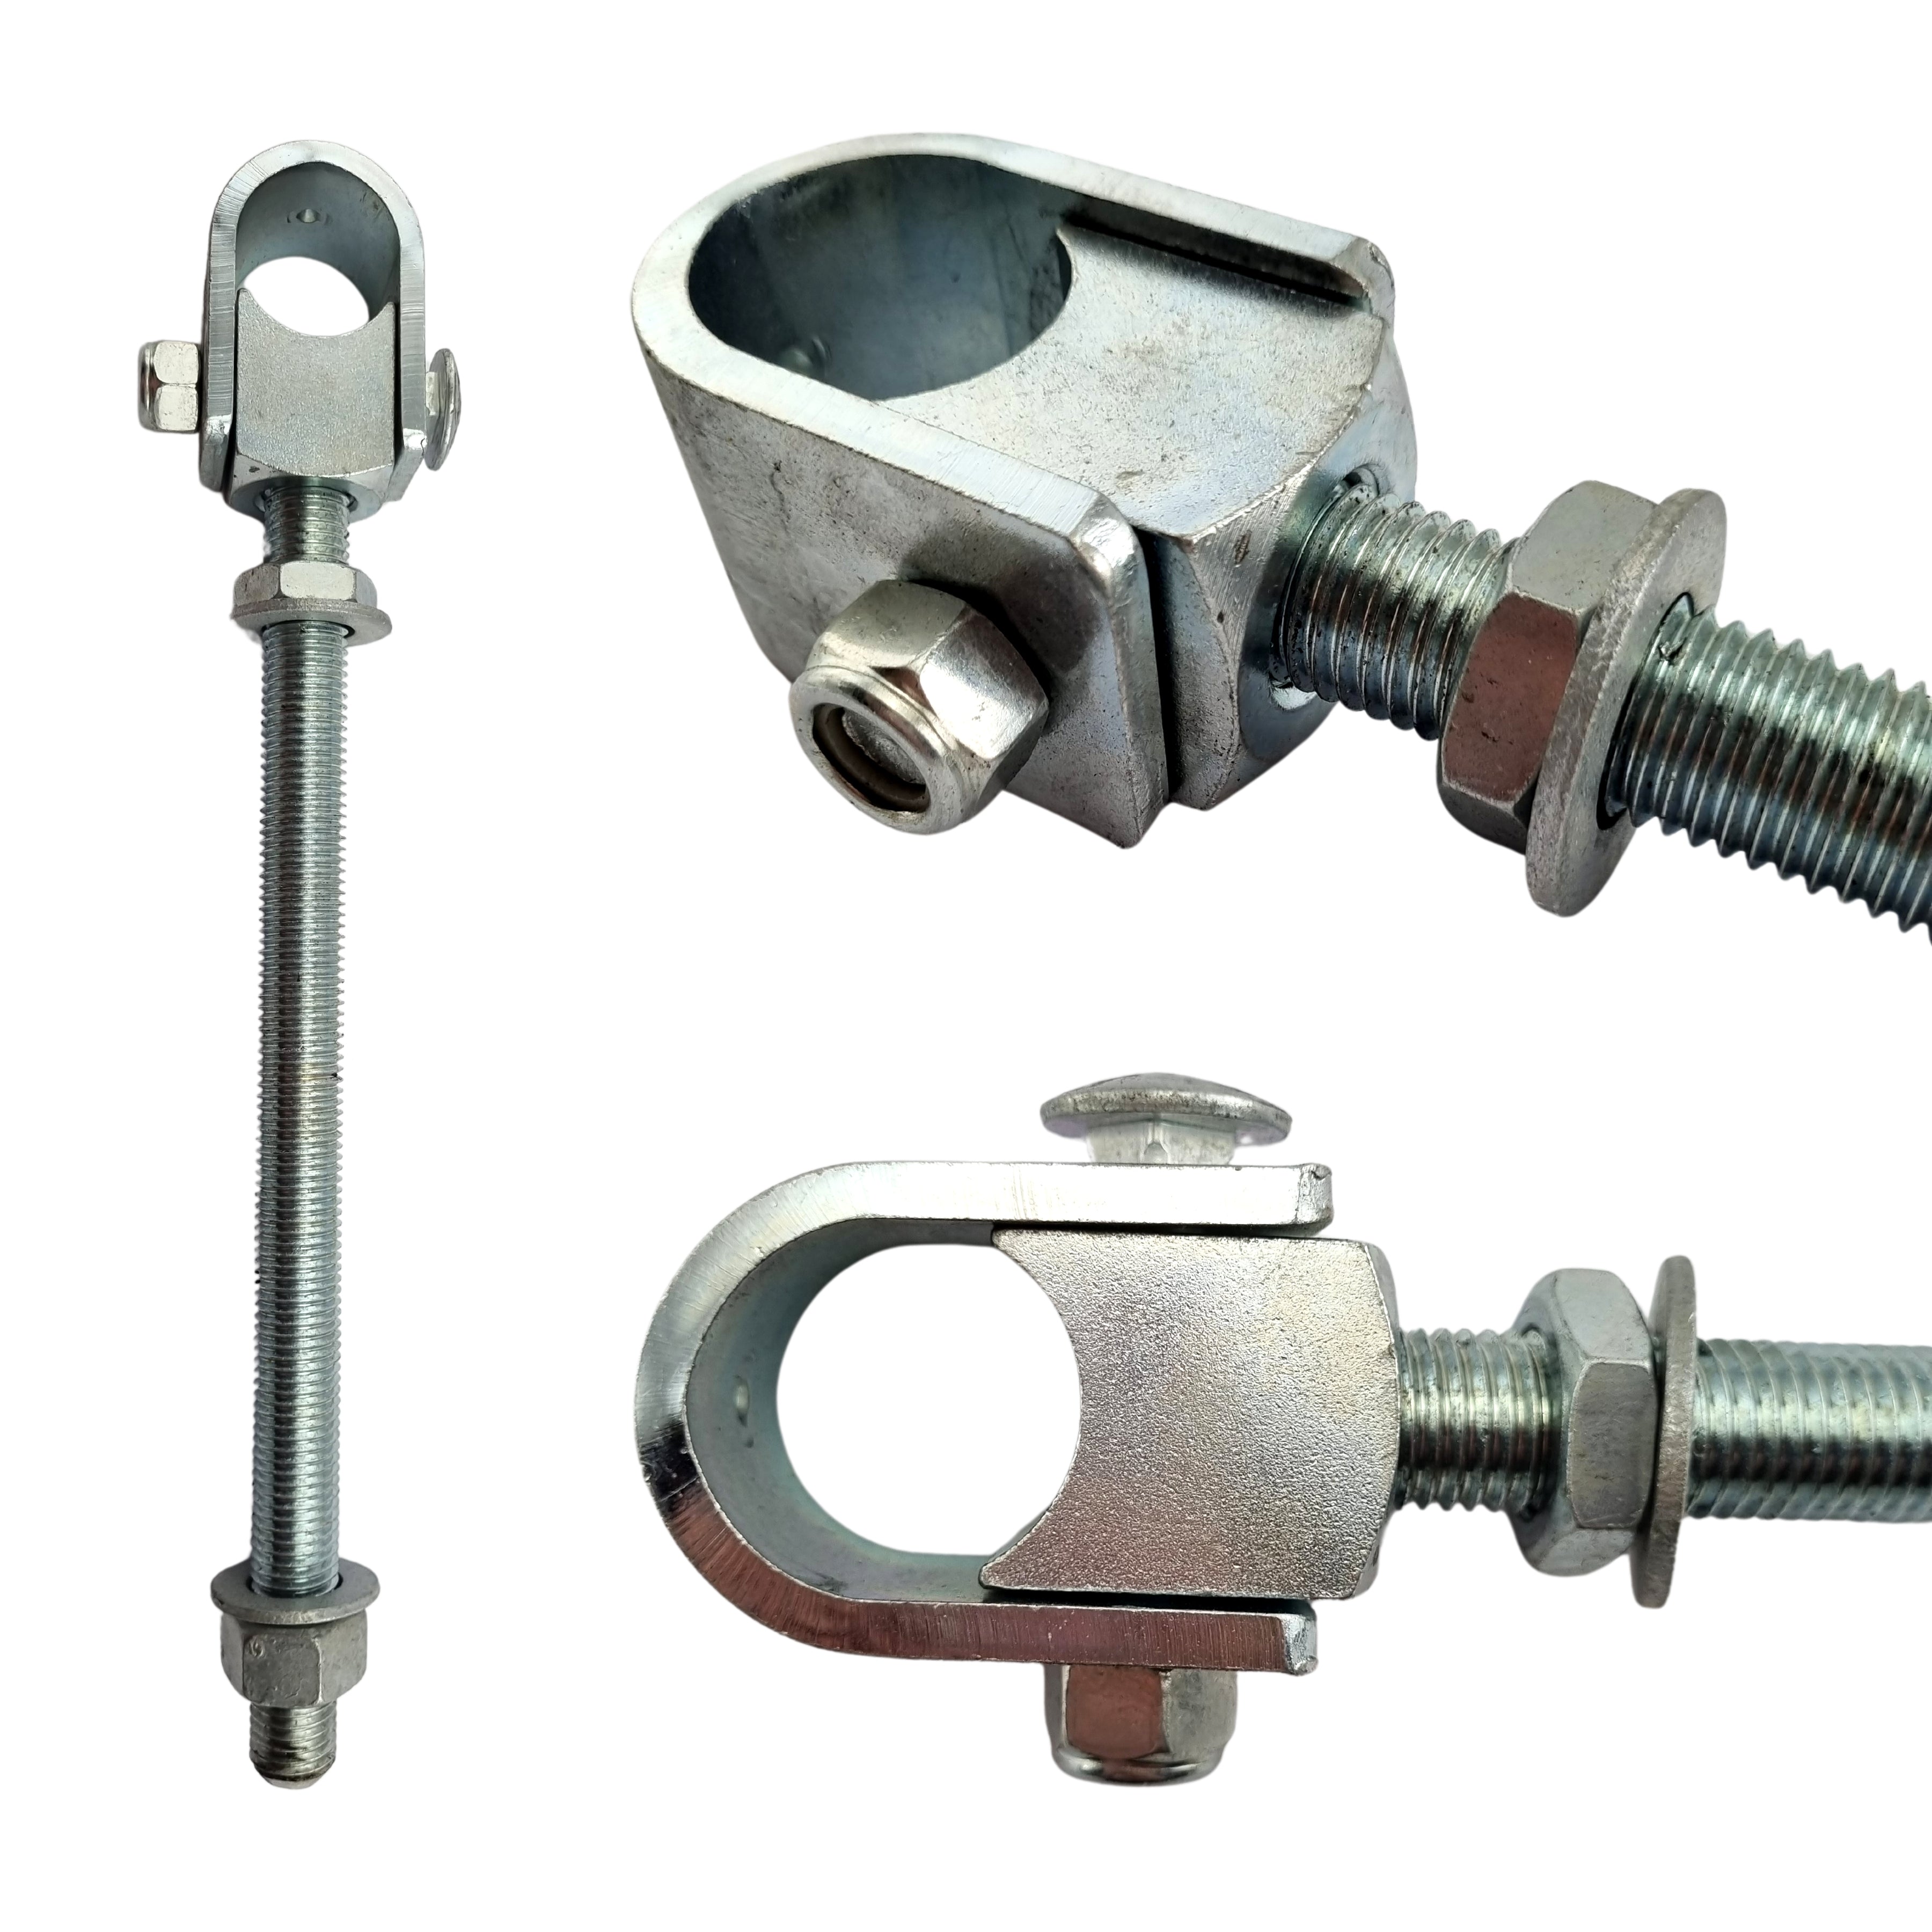 Deluxe hinge suitable for automatic gates, Australian made. Fence & gate fittings online - chain.com.au. Australia wide shipping.